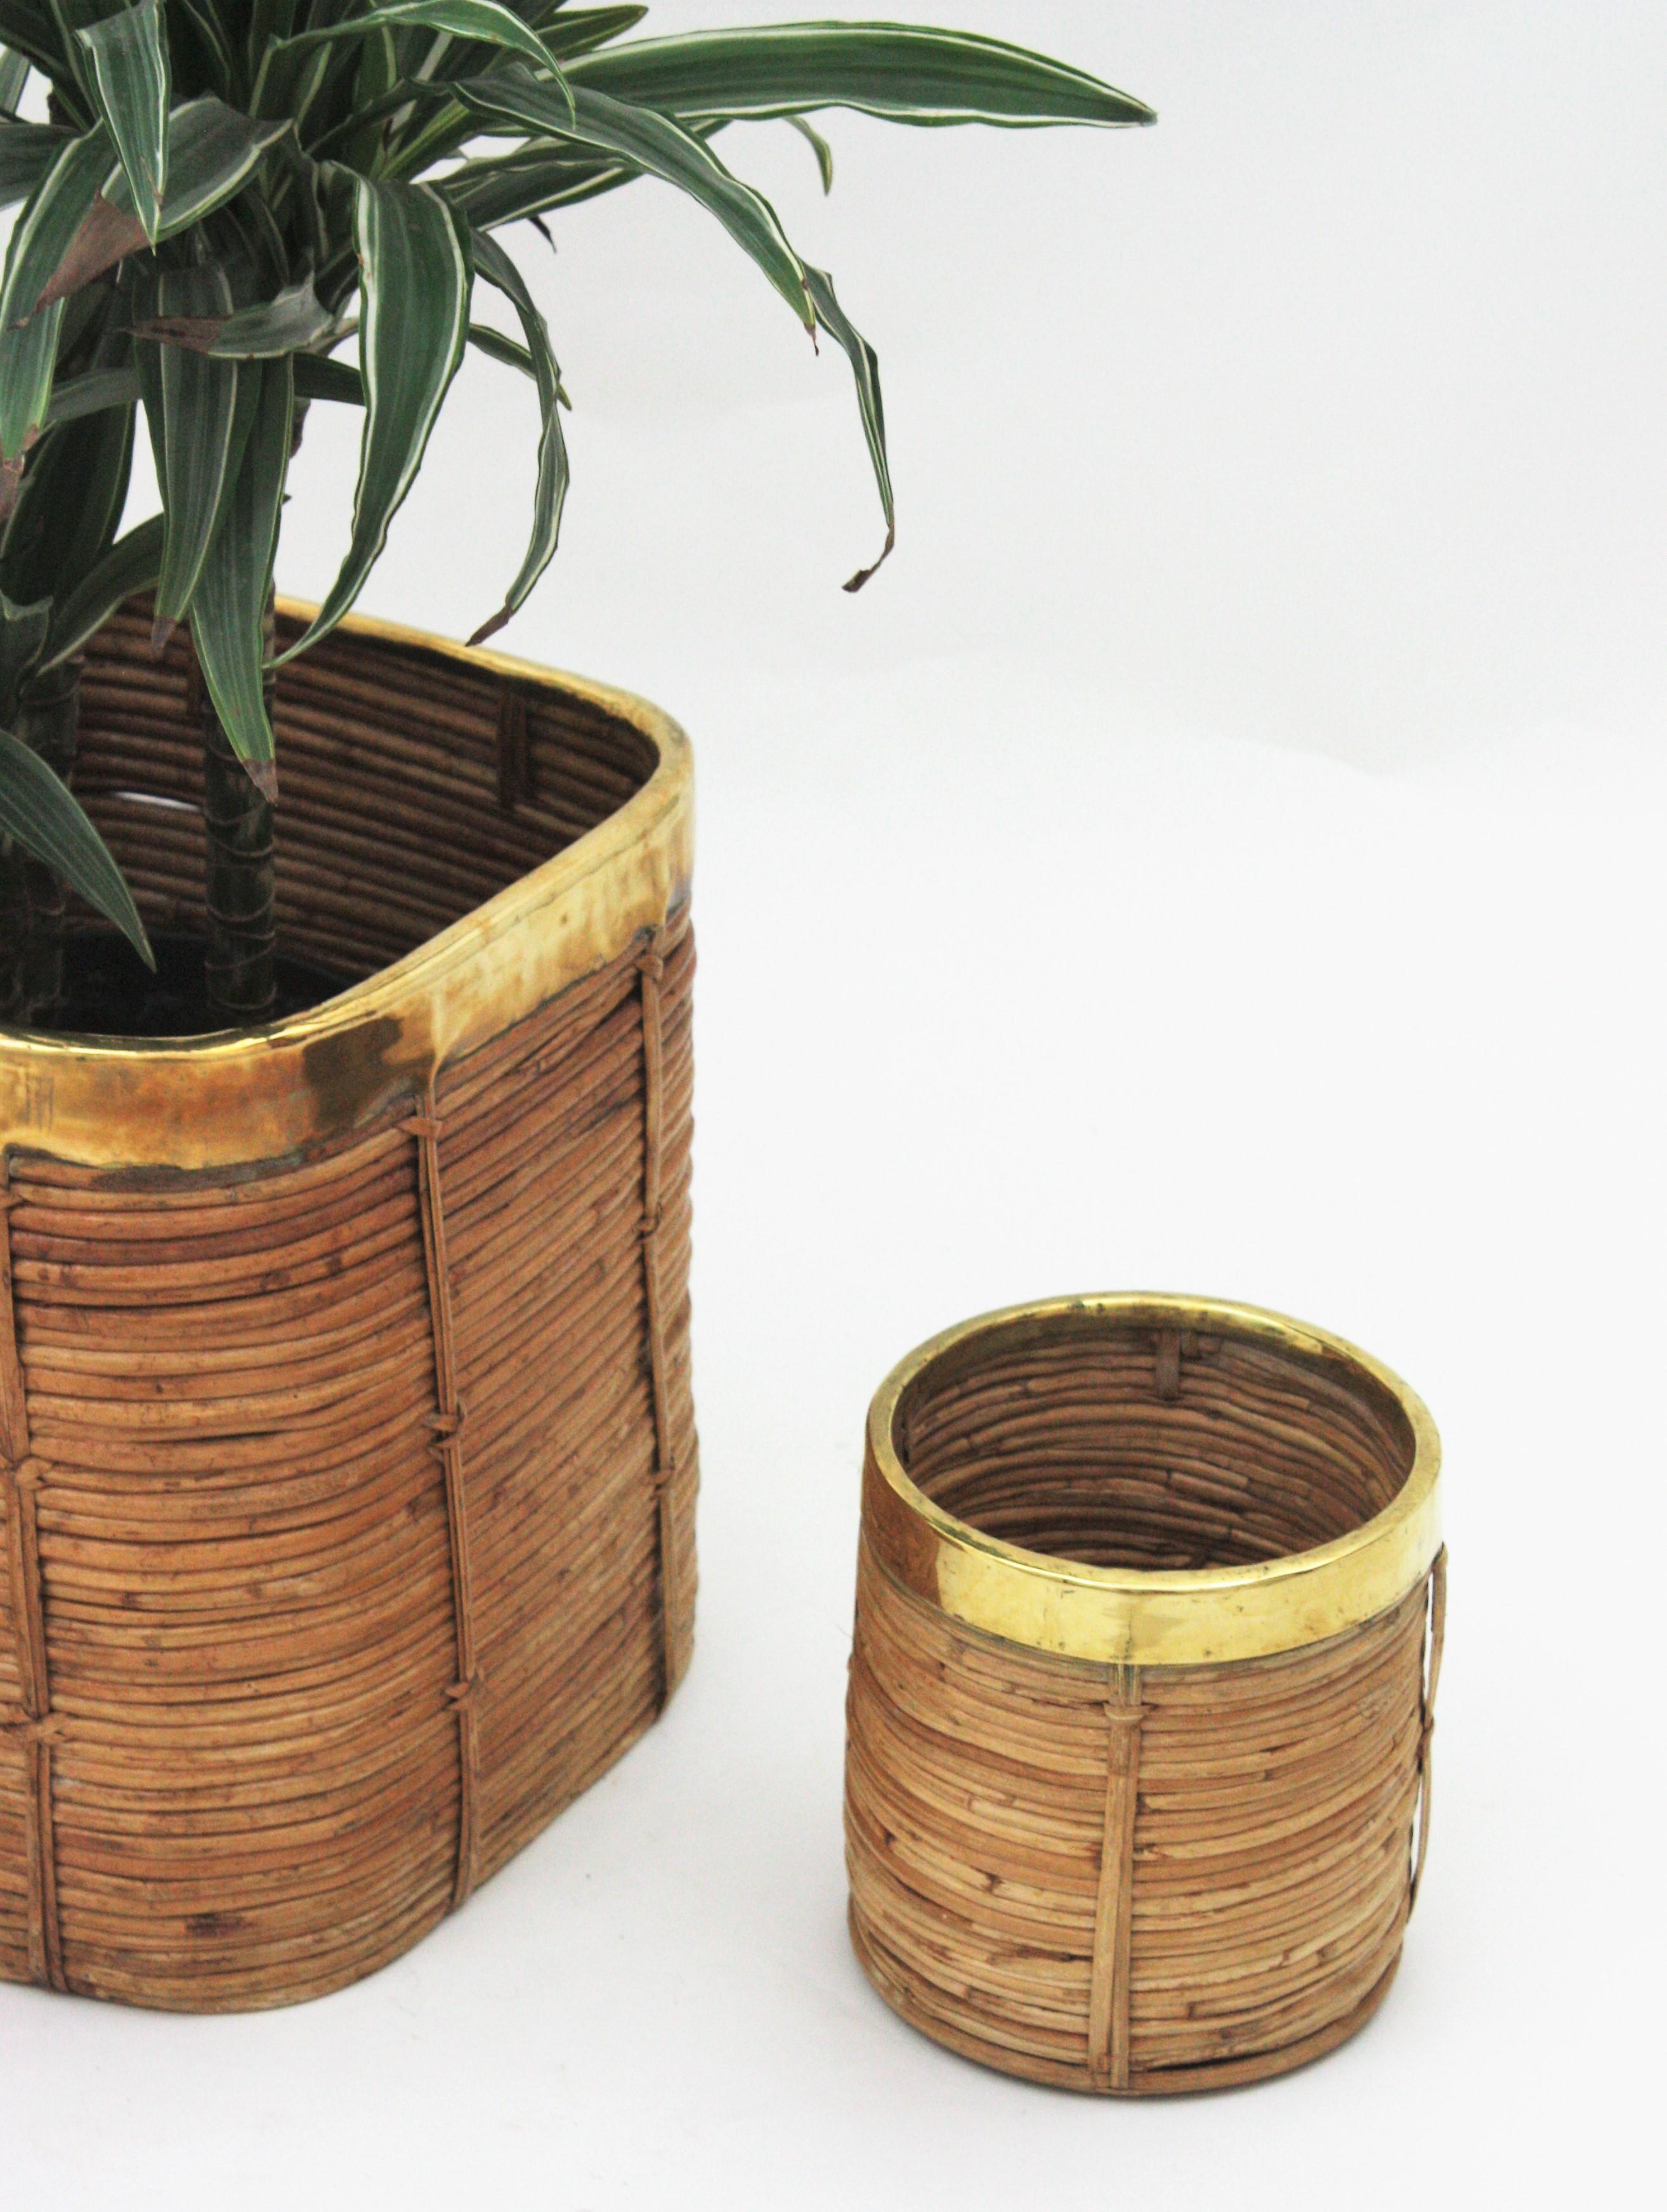 Three Rattan Bamboo Planters / Baskets with Brass Rim, Italy, 1970s For Sale 8